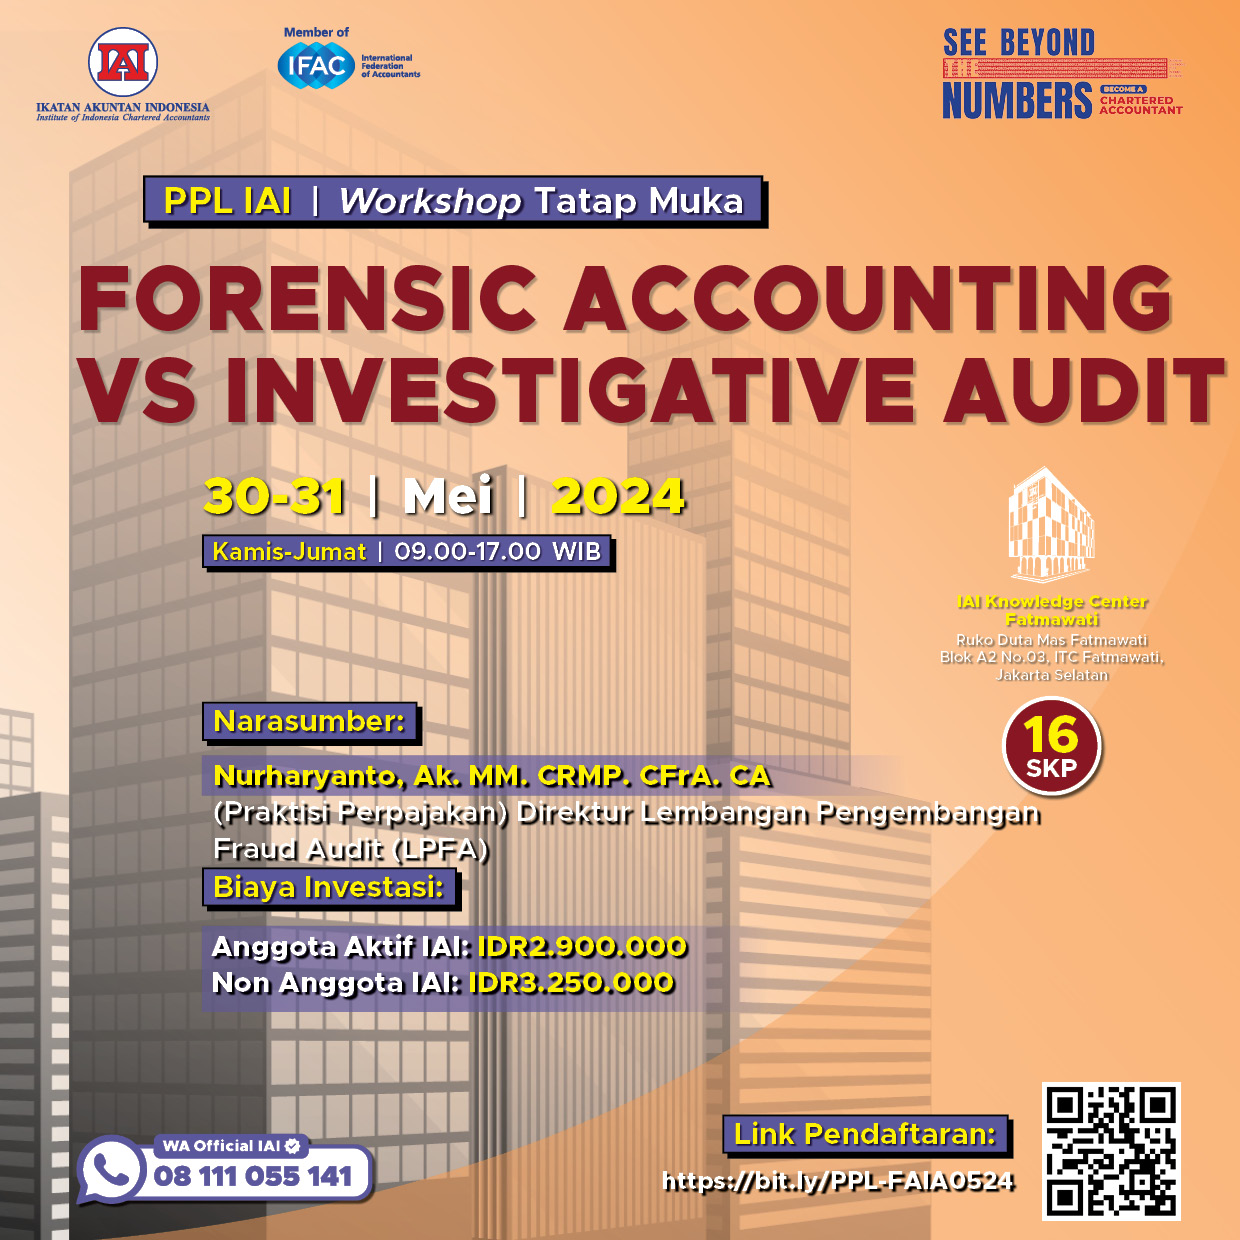 Forensic Accounting vs Investigative Audit